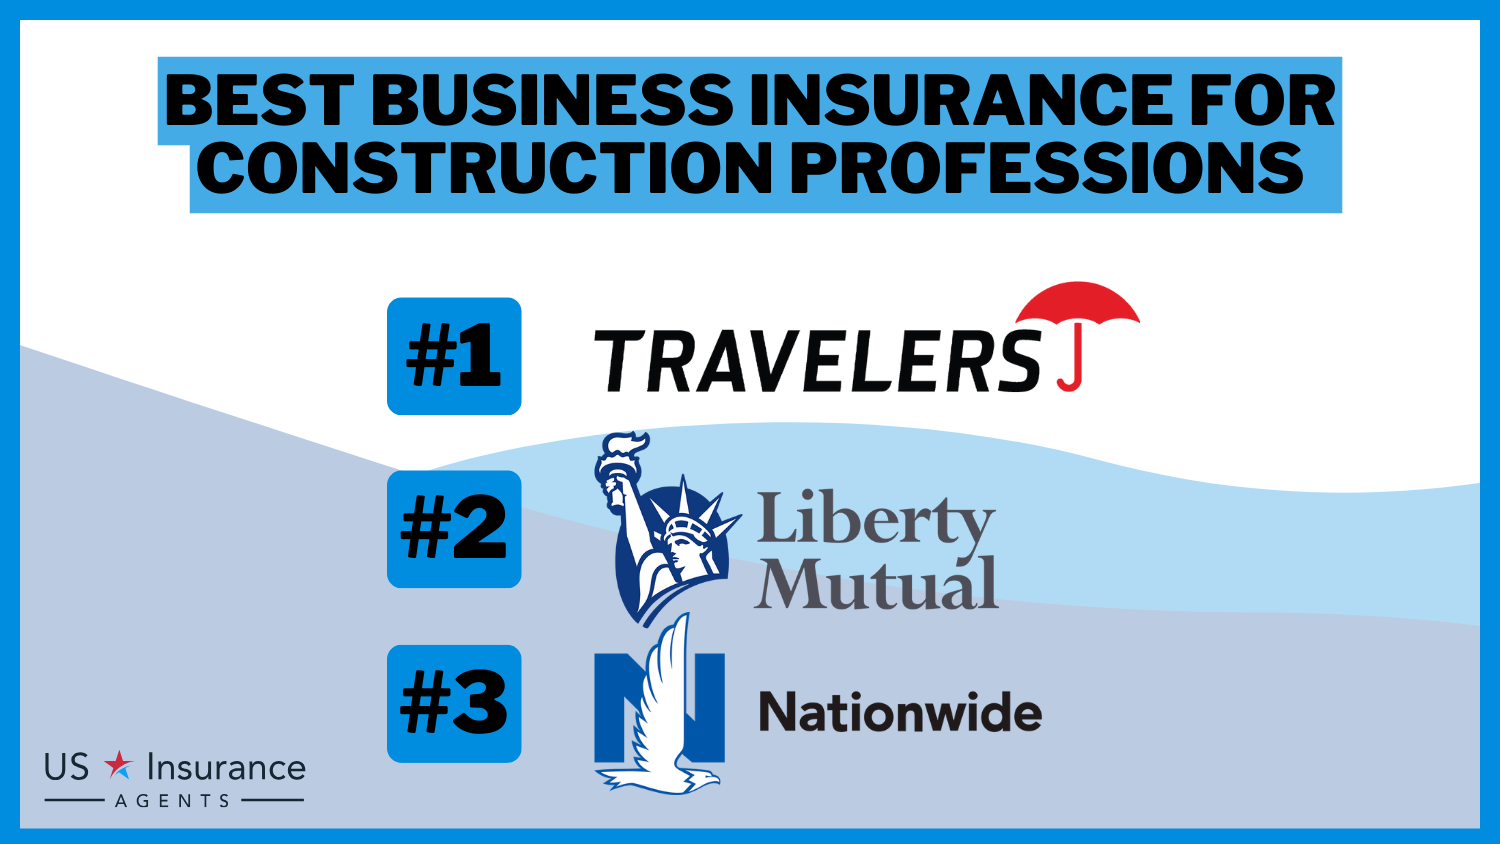 Travelers, Liberty Mutual, Nationwide: Best Business Insurance for Construction Professions